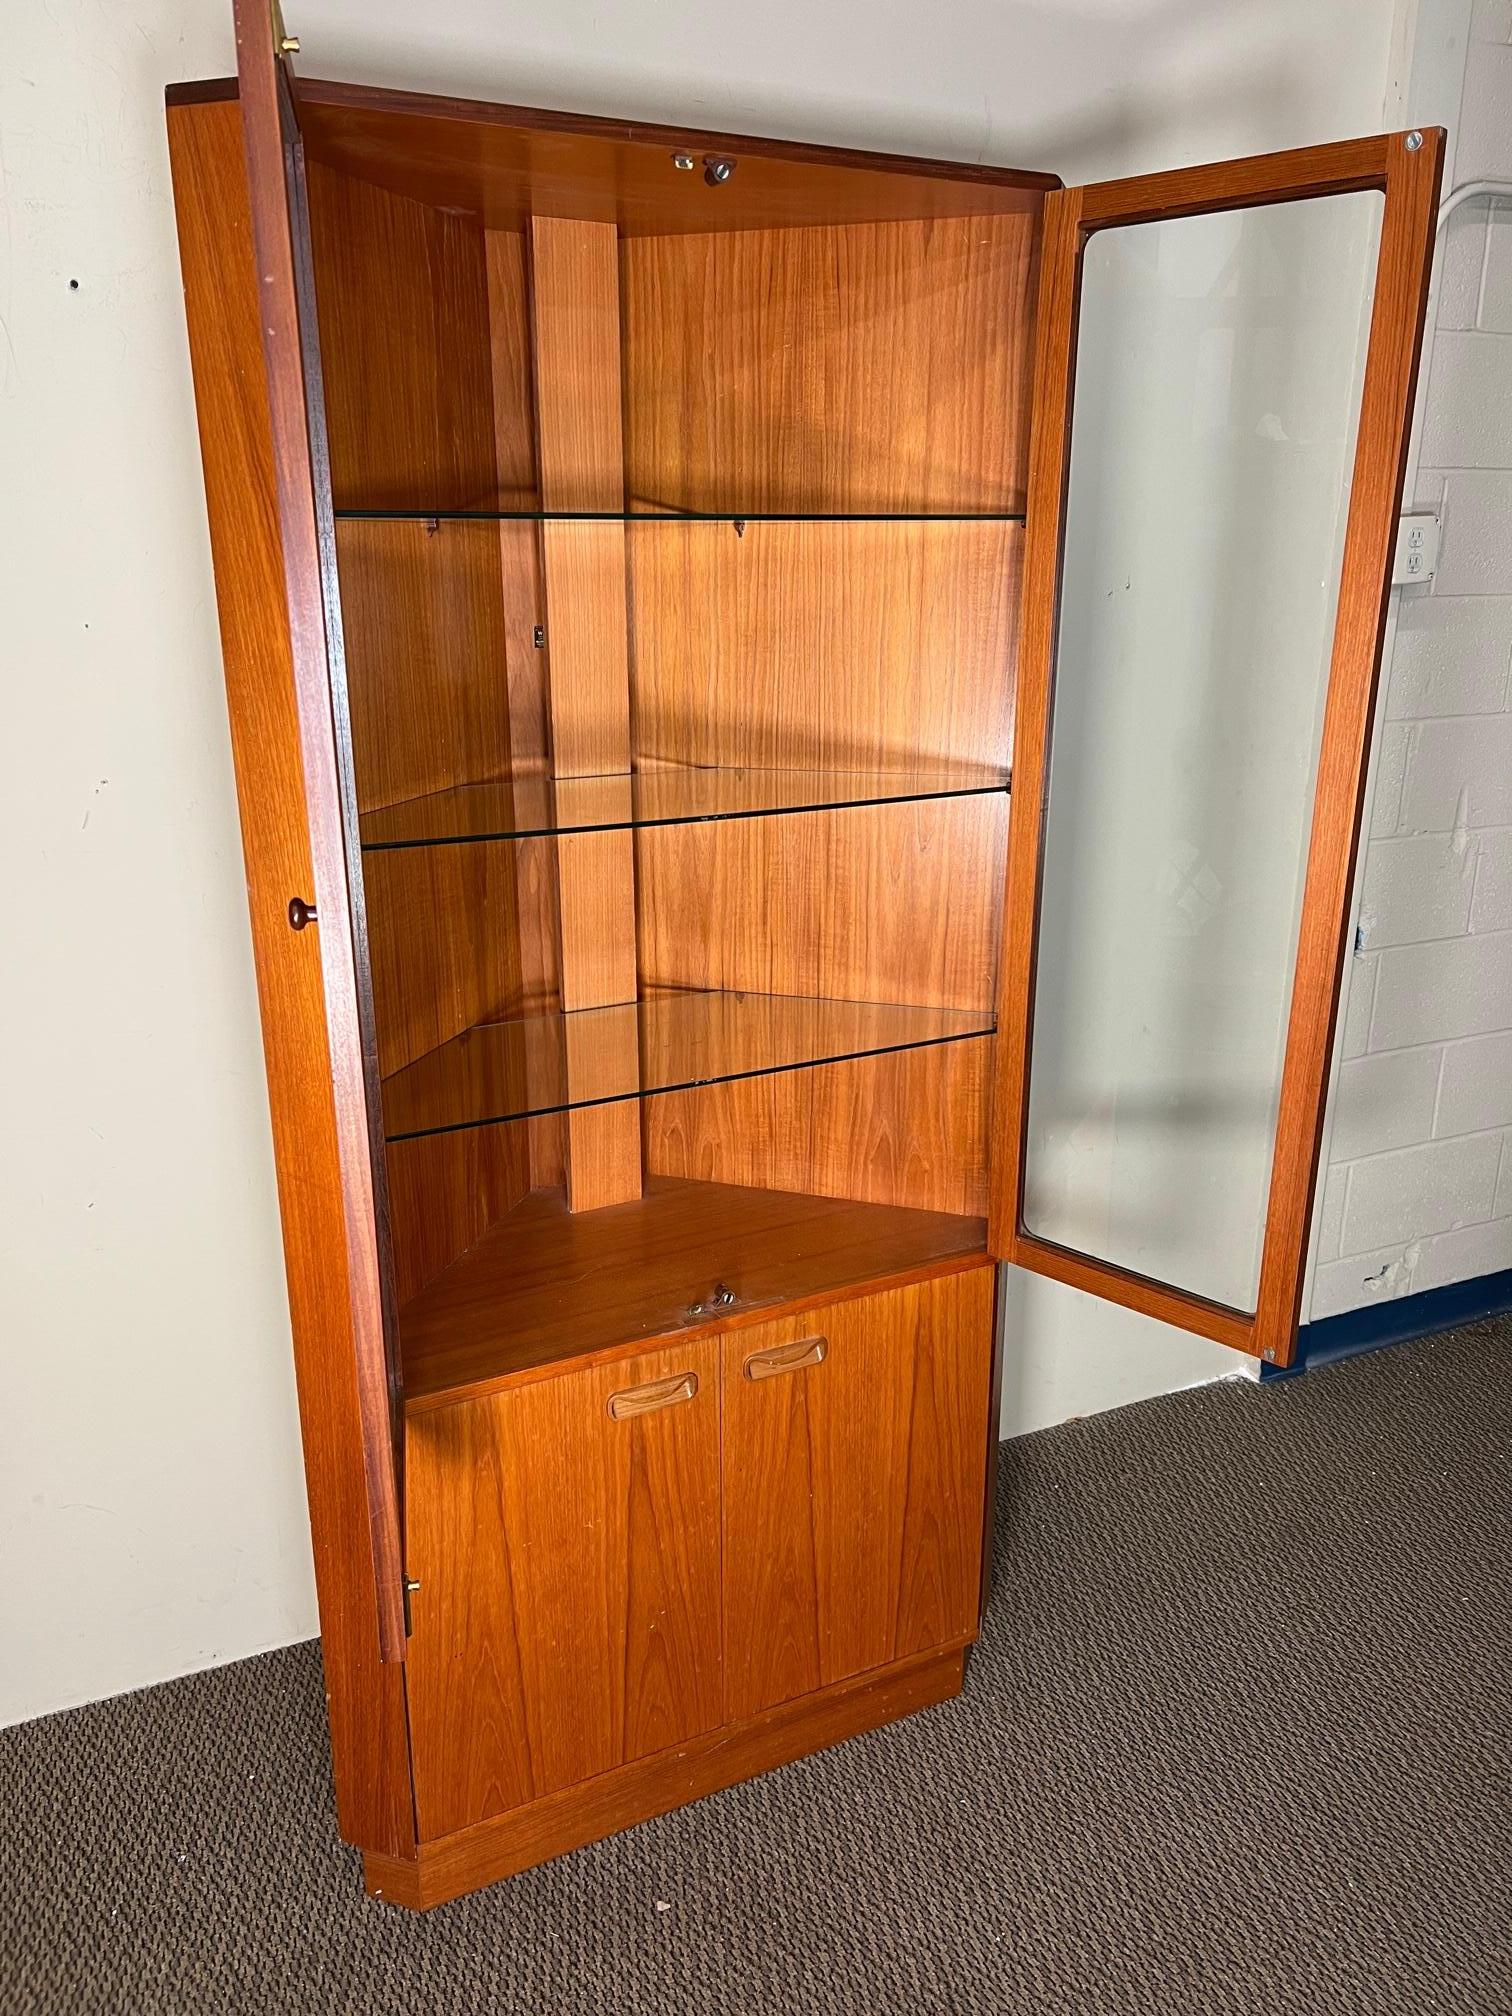 Outstanding teak corner cabinet by G Plan. Original label in the door. Adjustable glass shelves at the top. Adjustable wood shelf at the bottom.
Excellent vintage condition. Some stains on the top. Not visible though unless you stand on a step